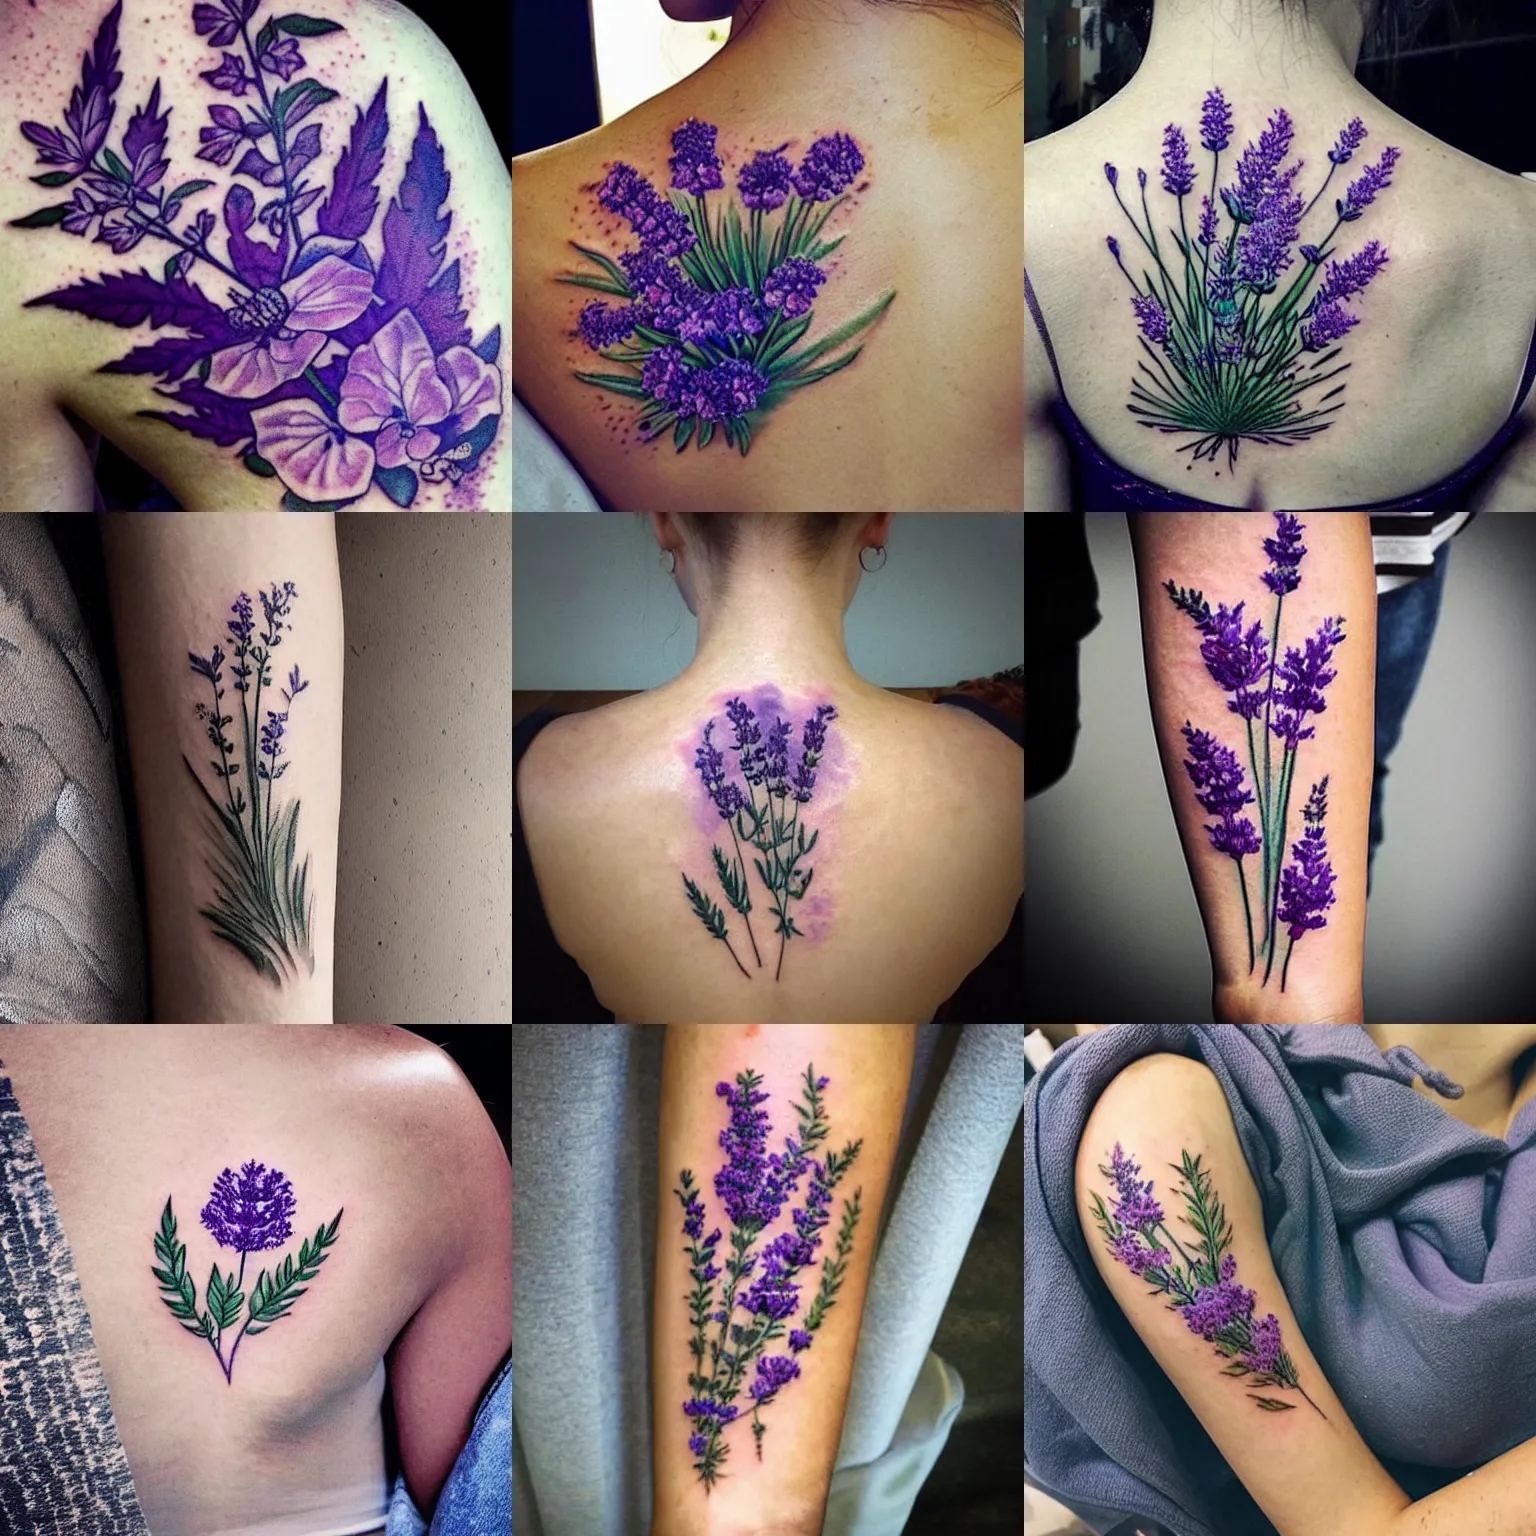 Tattoo tagged with: flower, small, tricep, tiny, forget me not, lavender,  little, nature, soltattoo, illustrative | inked-app.com